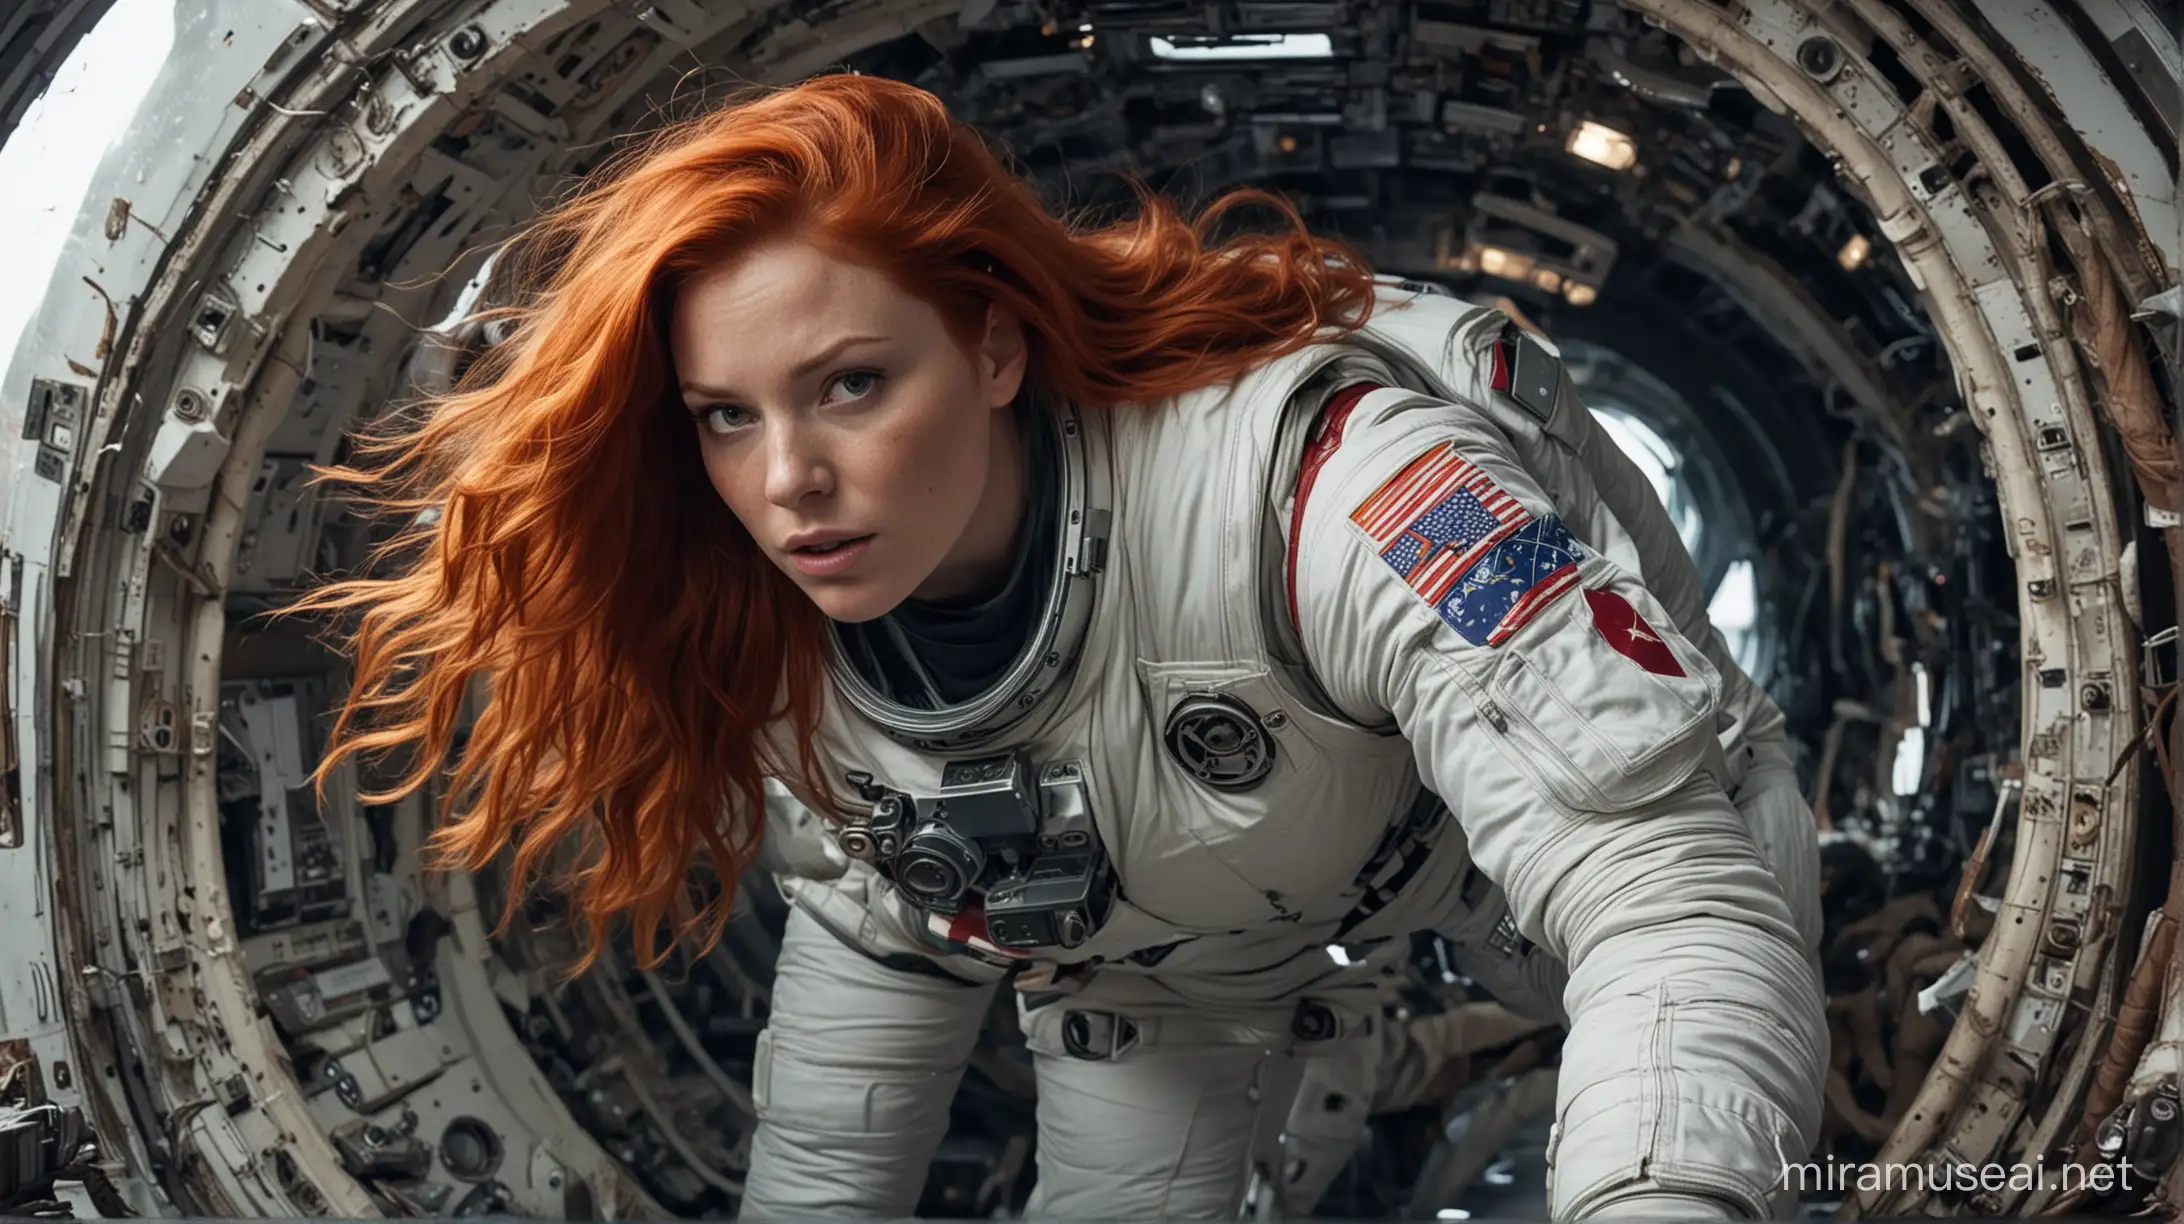 a voluptuous female astronaut with large breasts and flowing red hair floats inside an old and broken down looking spaceship as she struggles to take off her spacesuit.